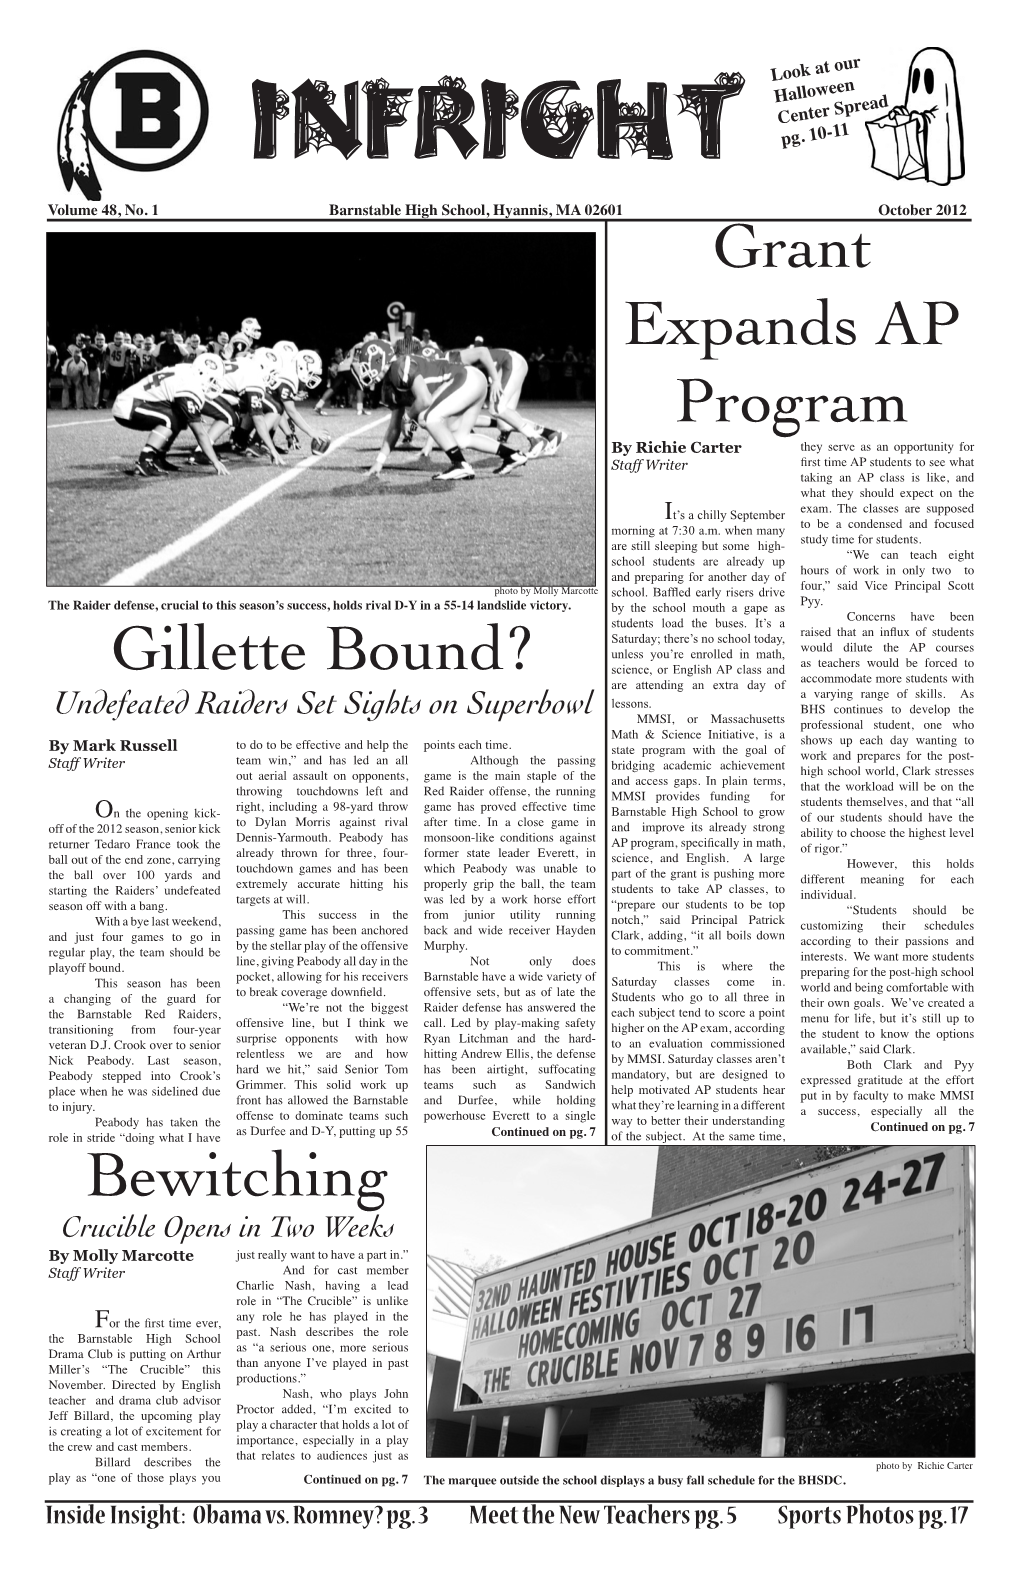 Grant Expands AP Program Bewitching Gillette Bound?